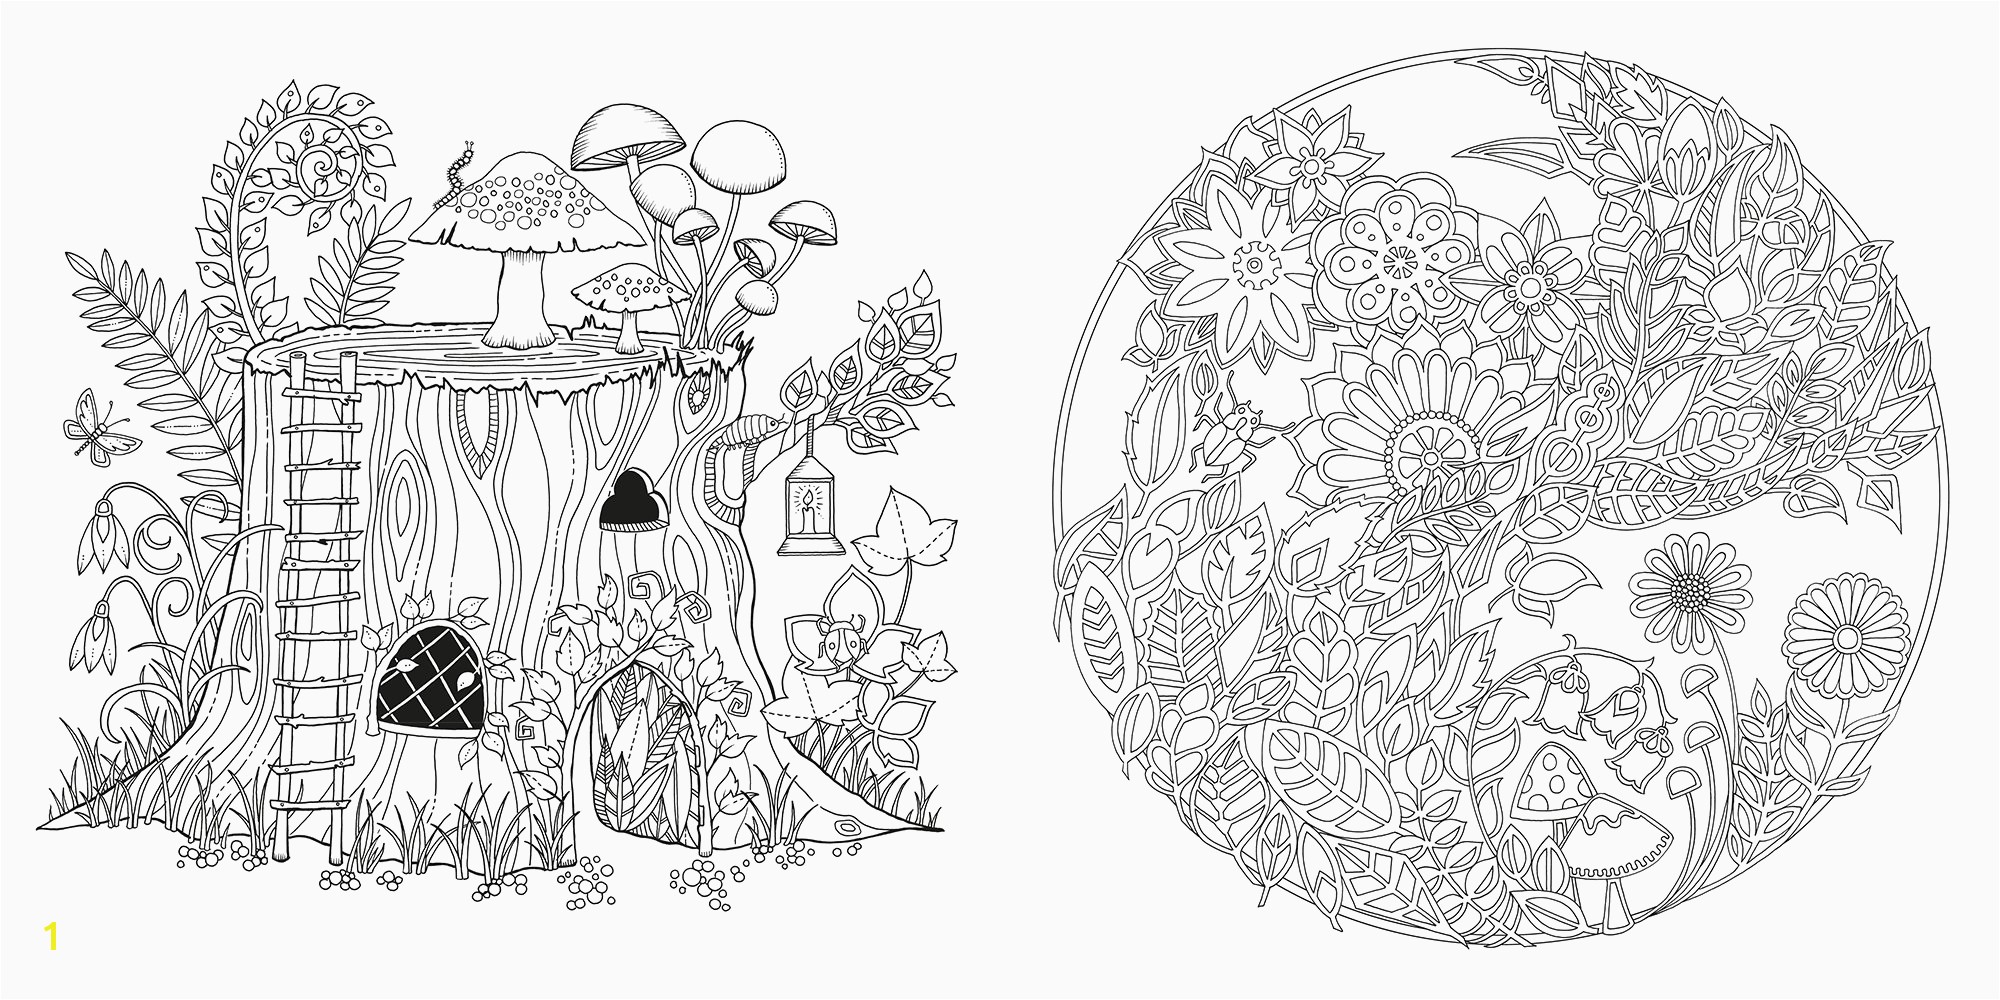 Enchanted forest Coloring Pages Pdf forest Coloring Pages Elegant Amazon Enchanted forest An Inky Quest